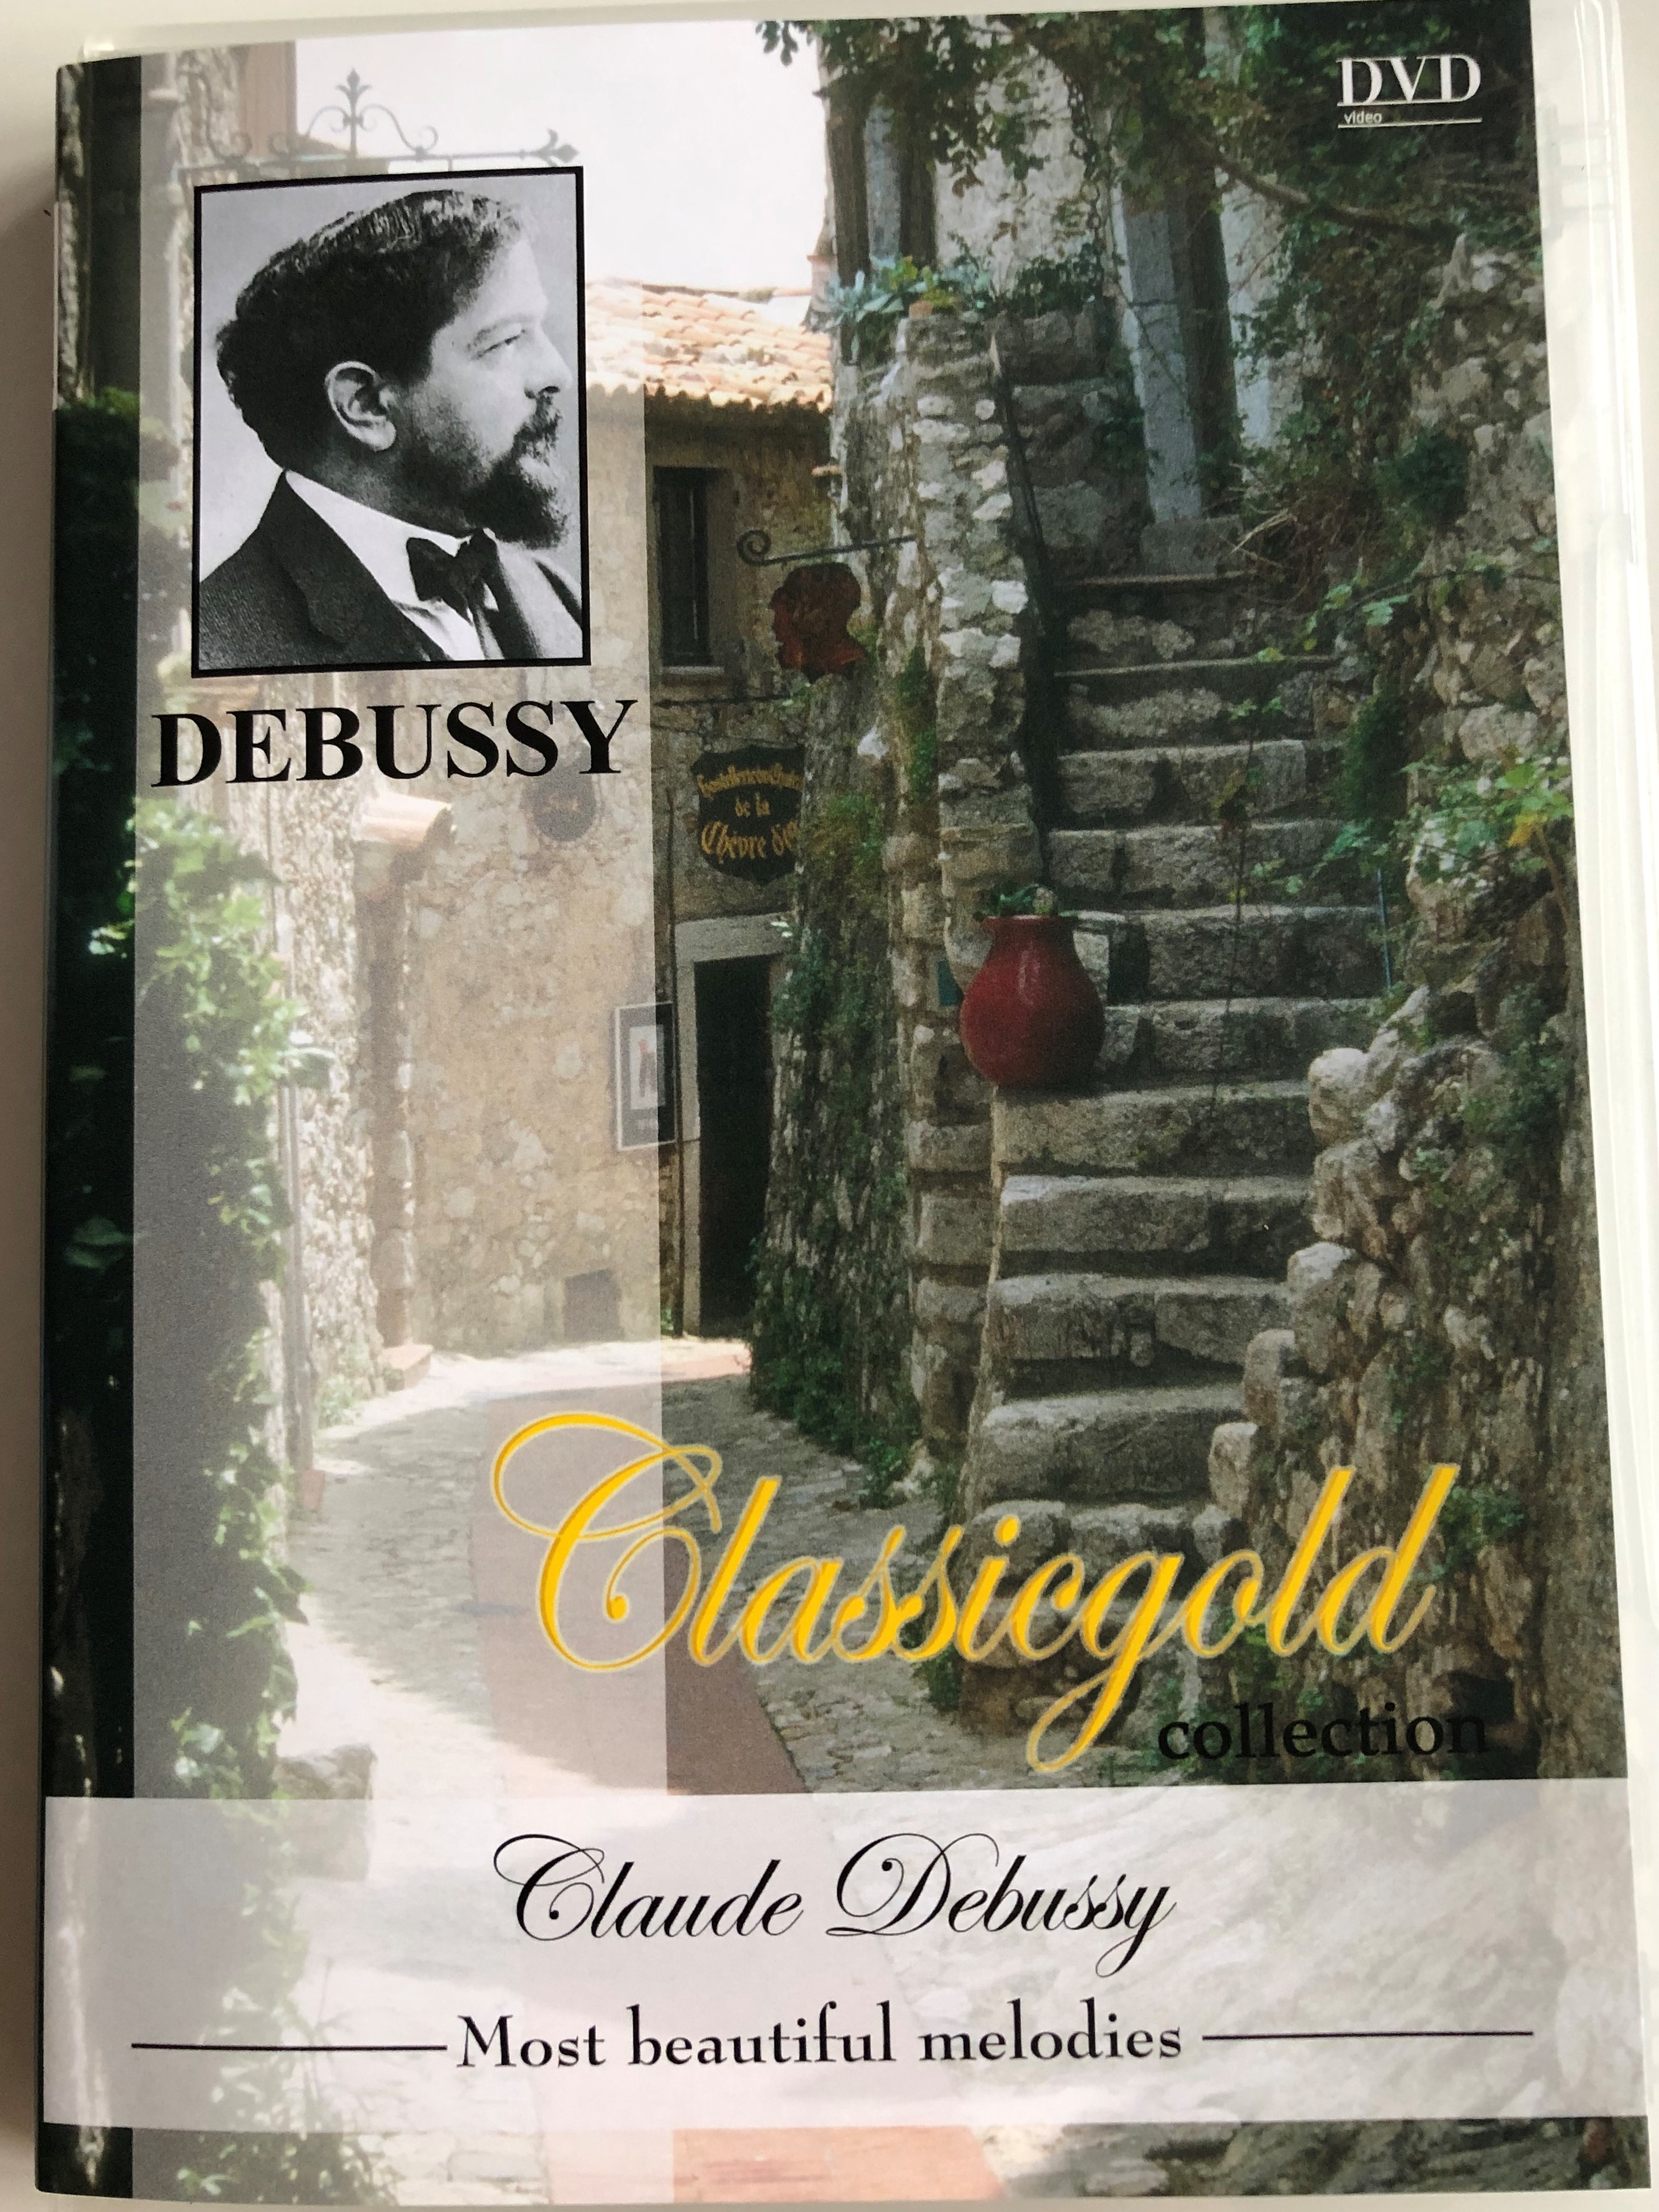 claude-debussy-classicgold-collection-dvd-2003-1.jpg